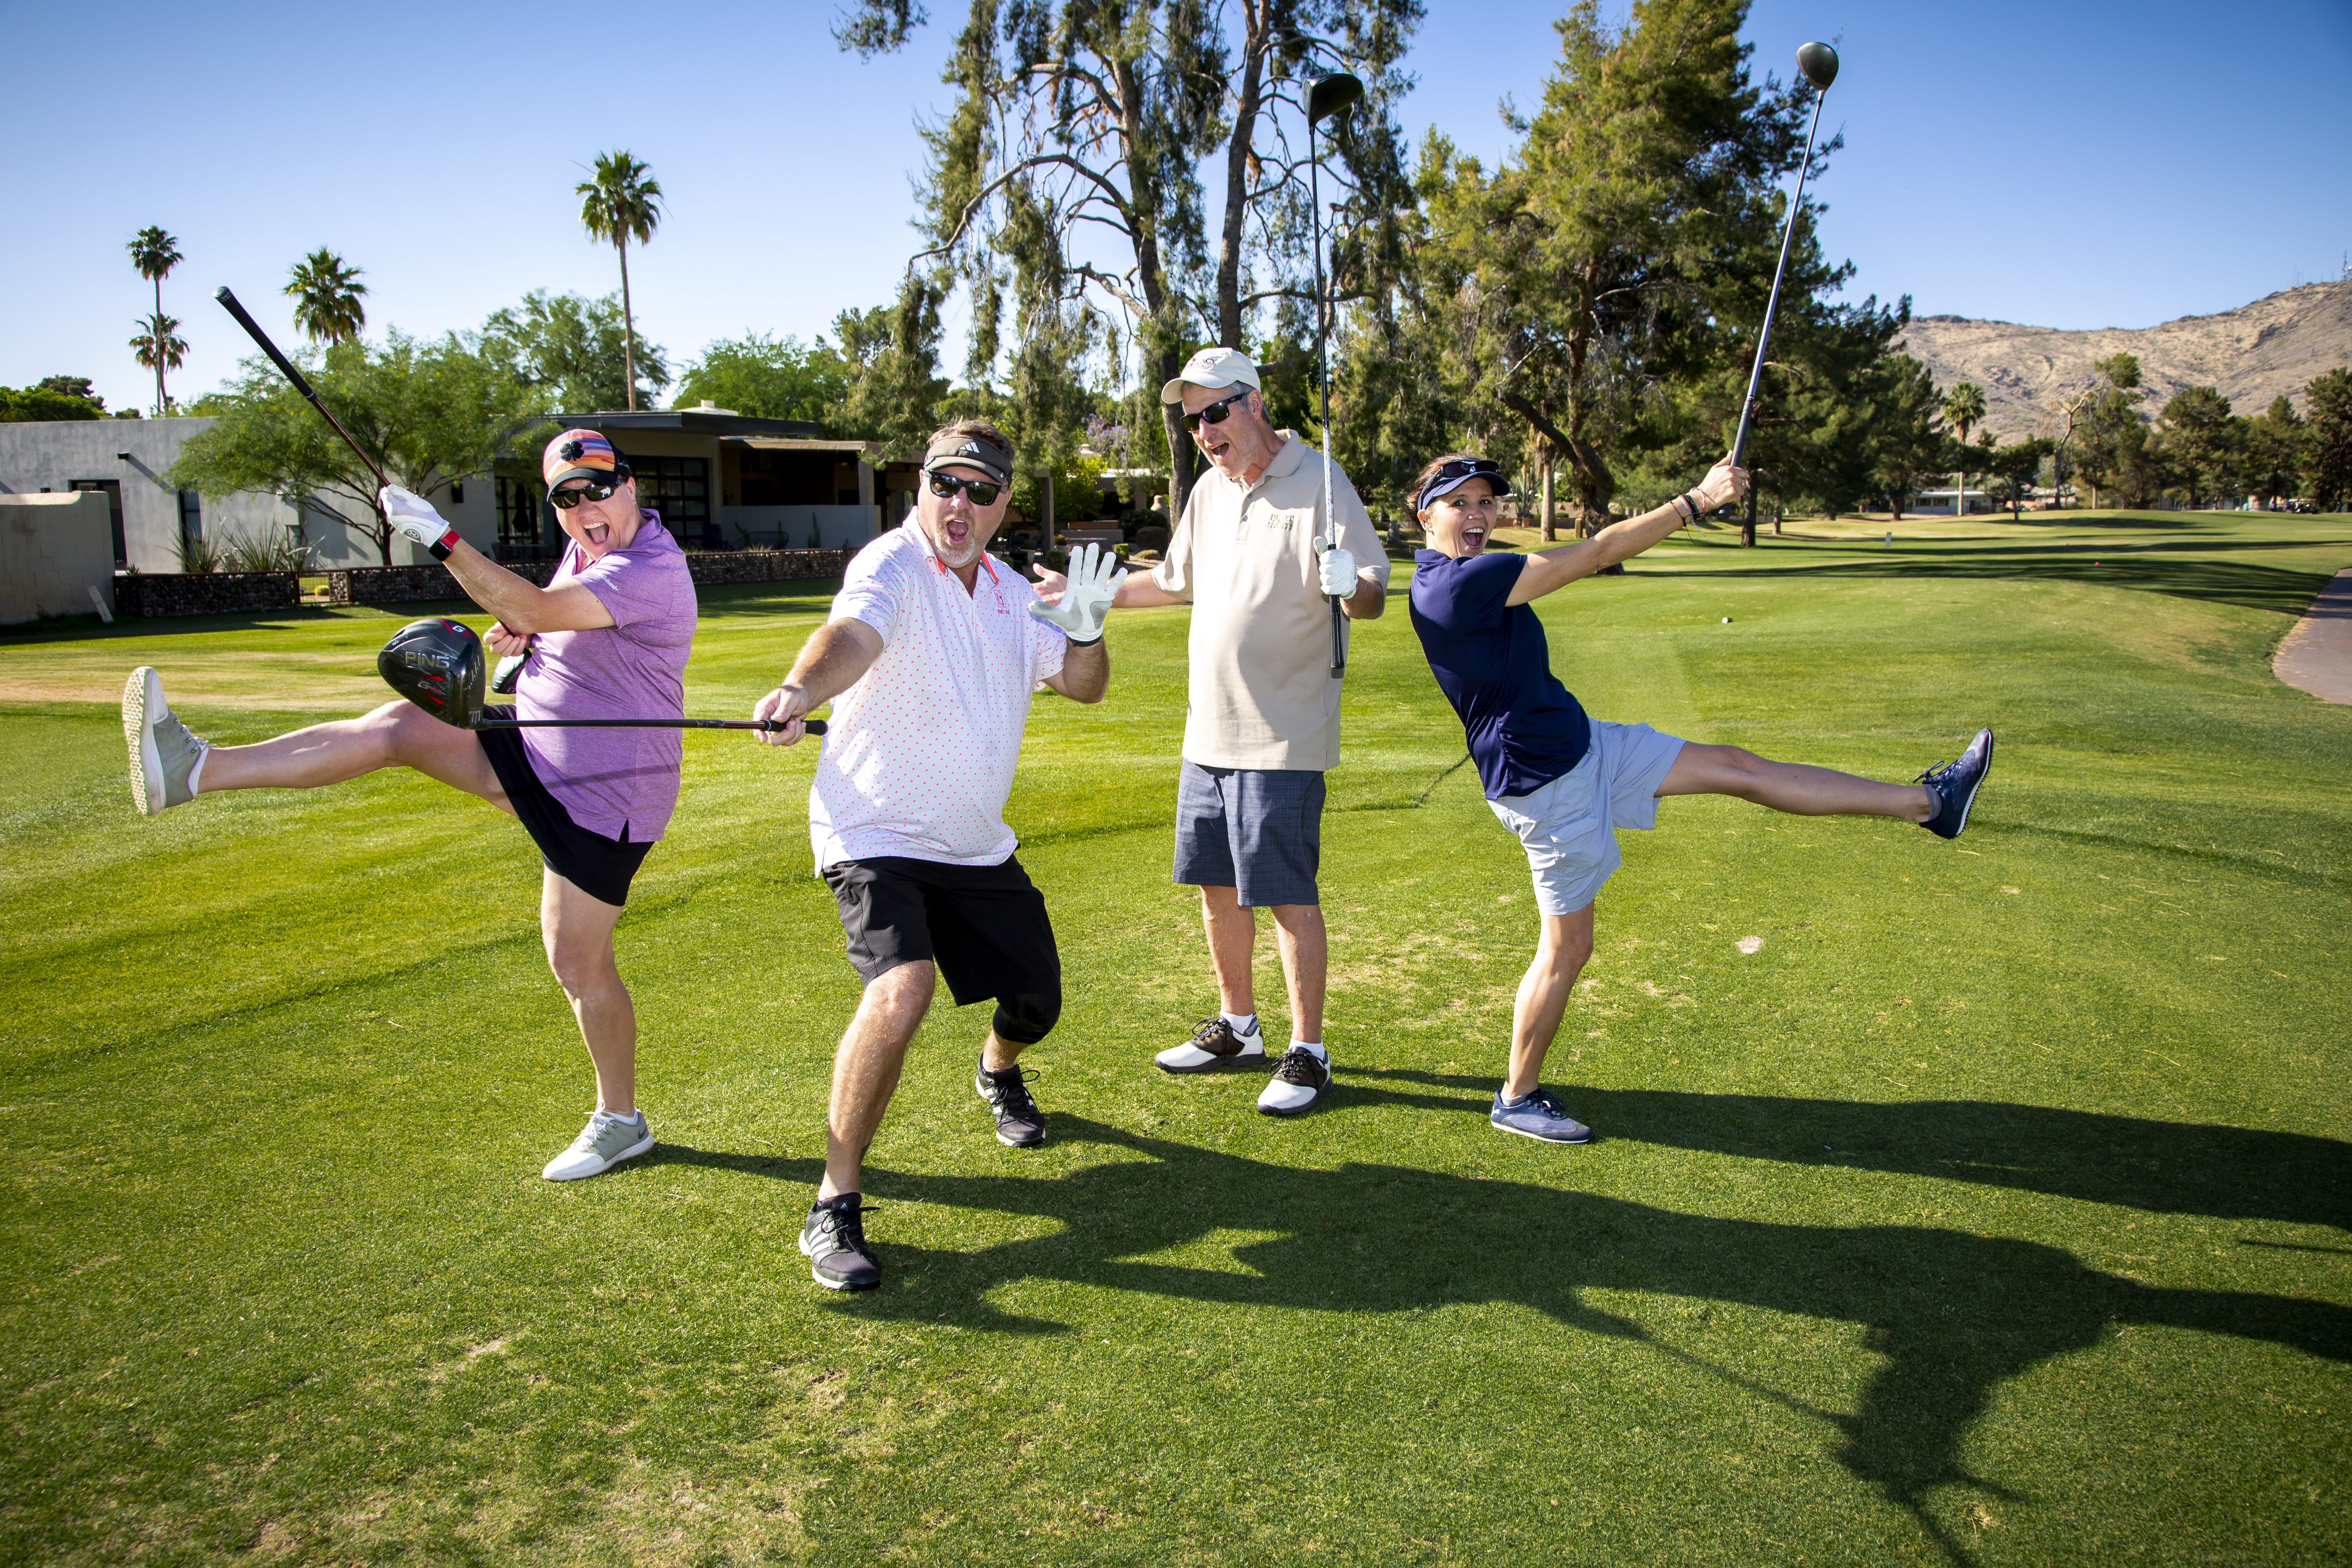 AZCREW members posing on the green at a Golf event